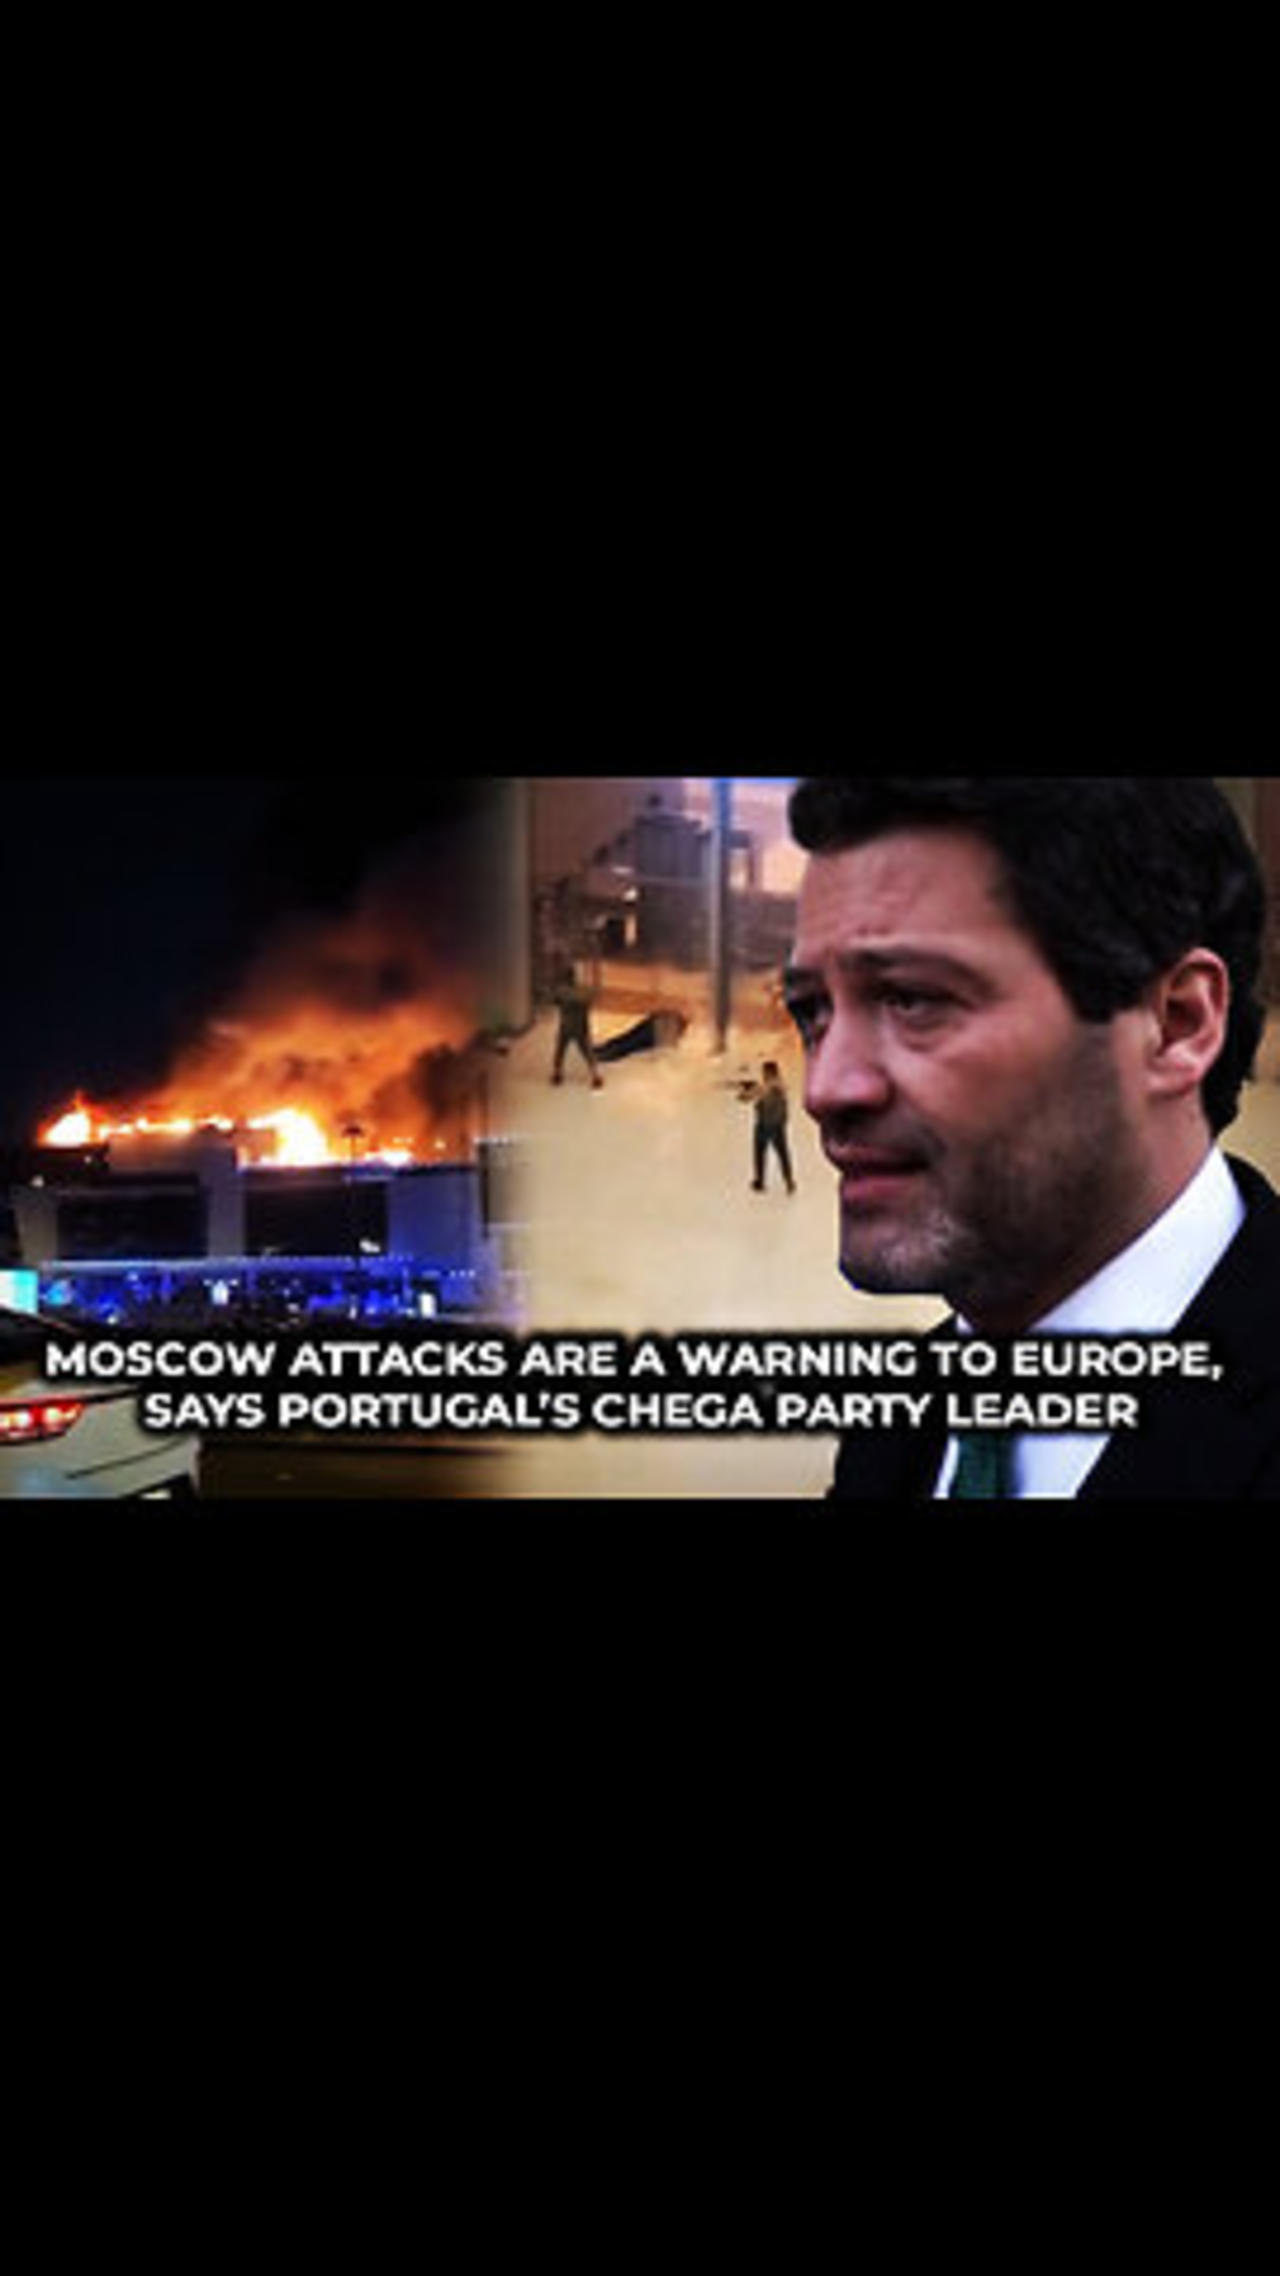 Moscow Attacks Are a Warning to Europe, says Portugal’s Chegas Party Leader